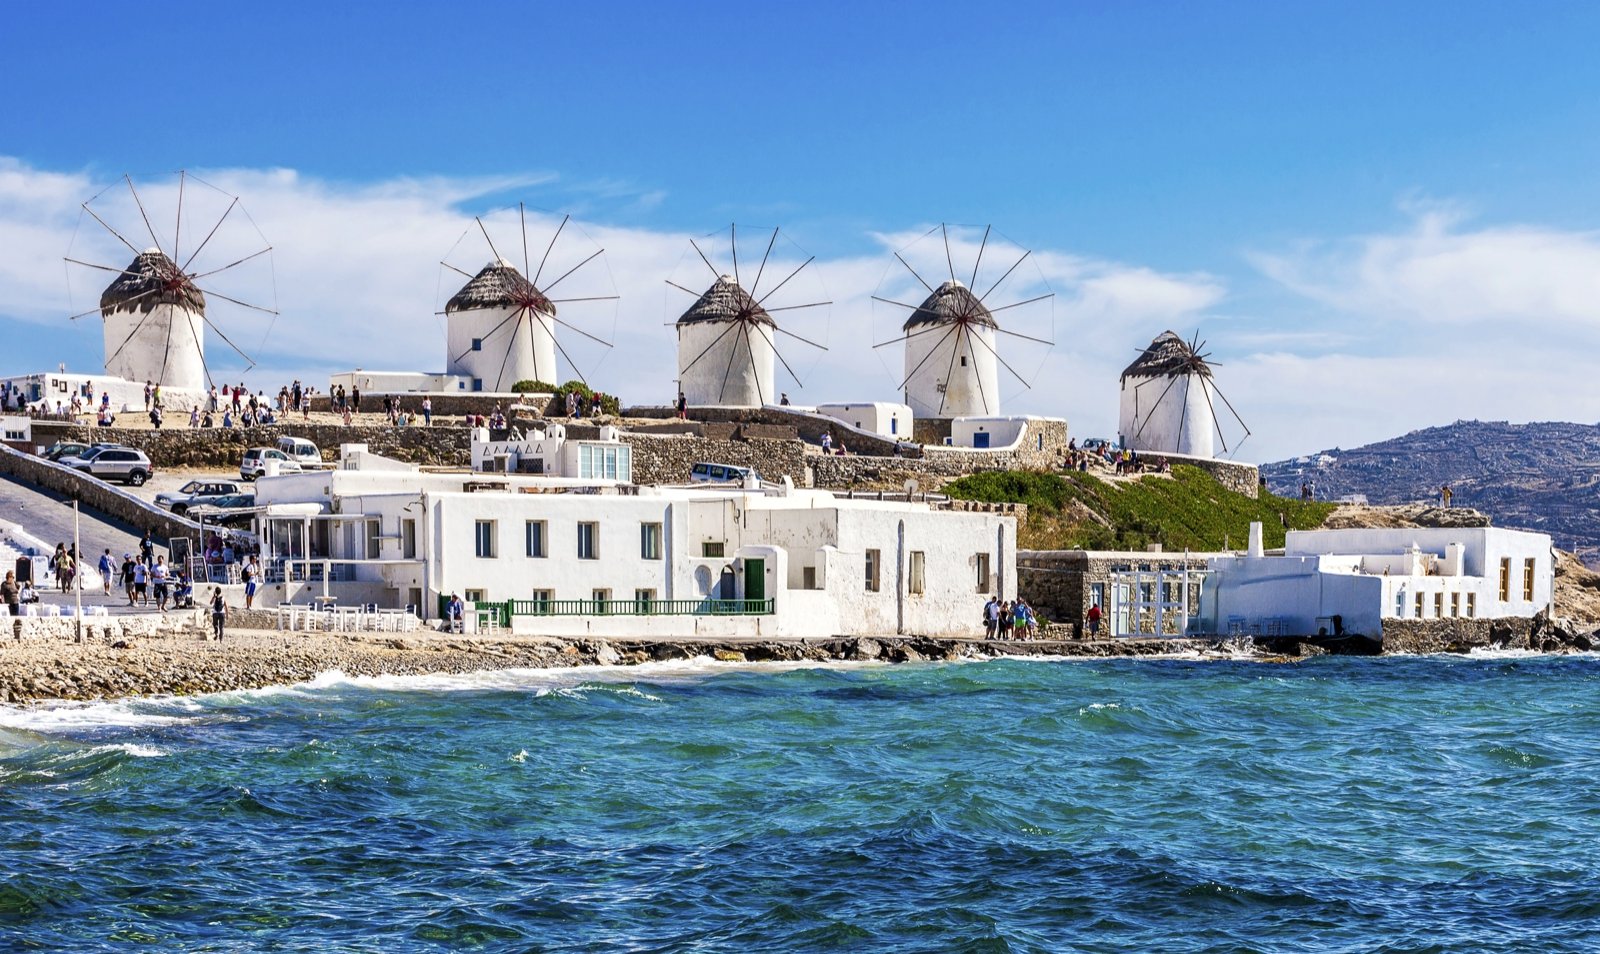 How to see the windmills on Mykonos